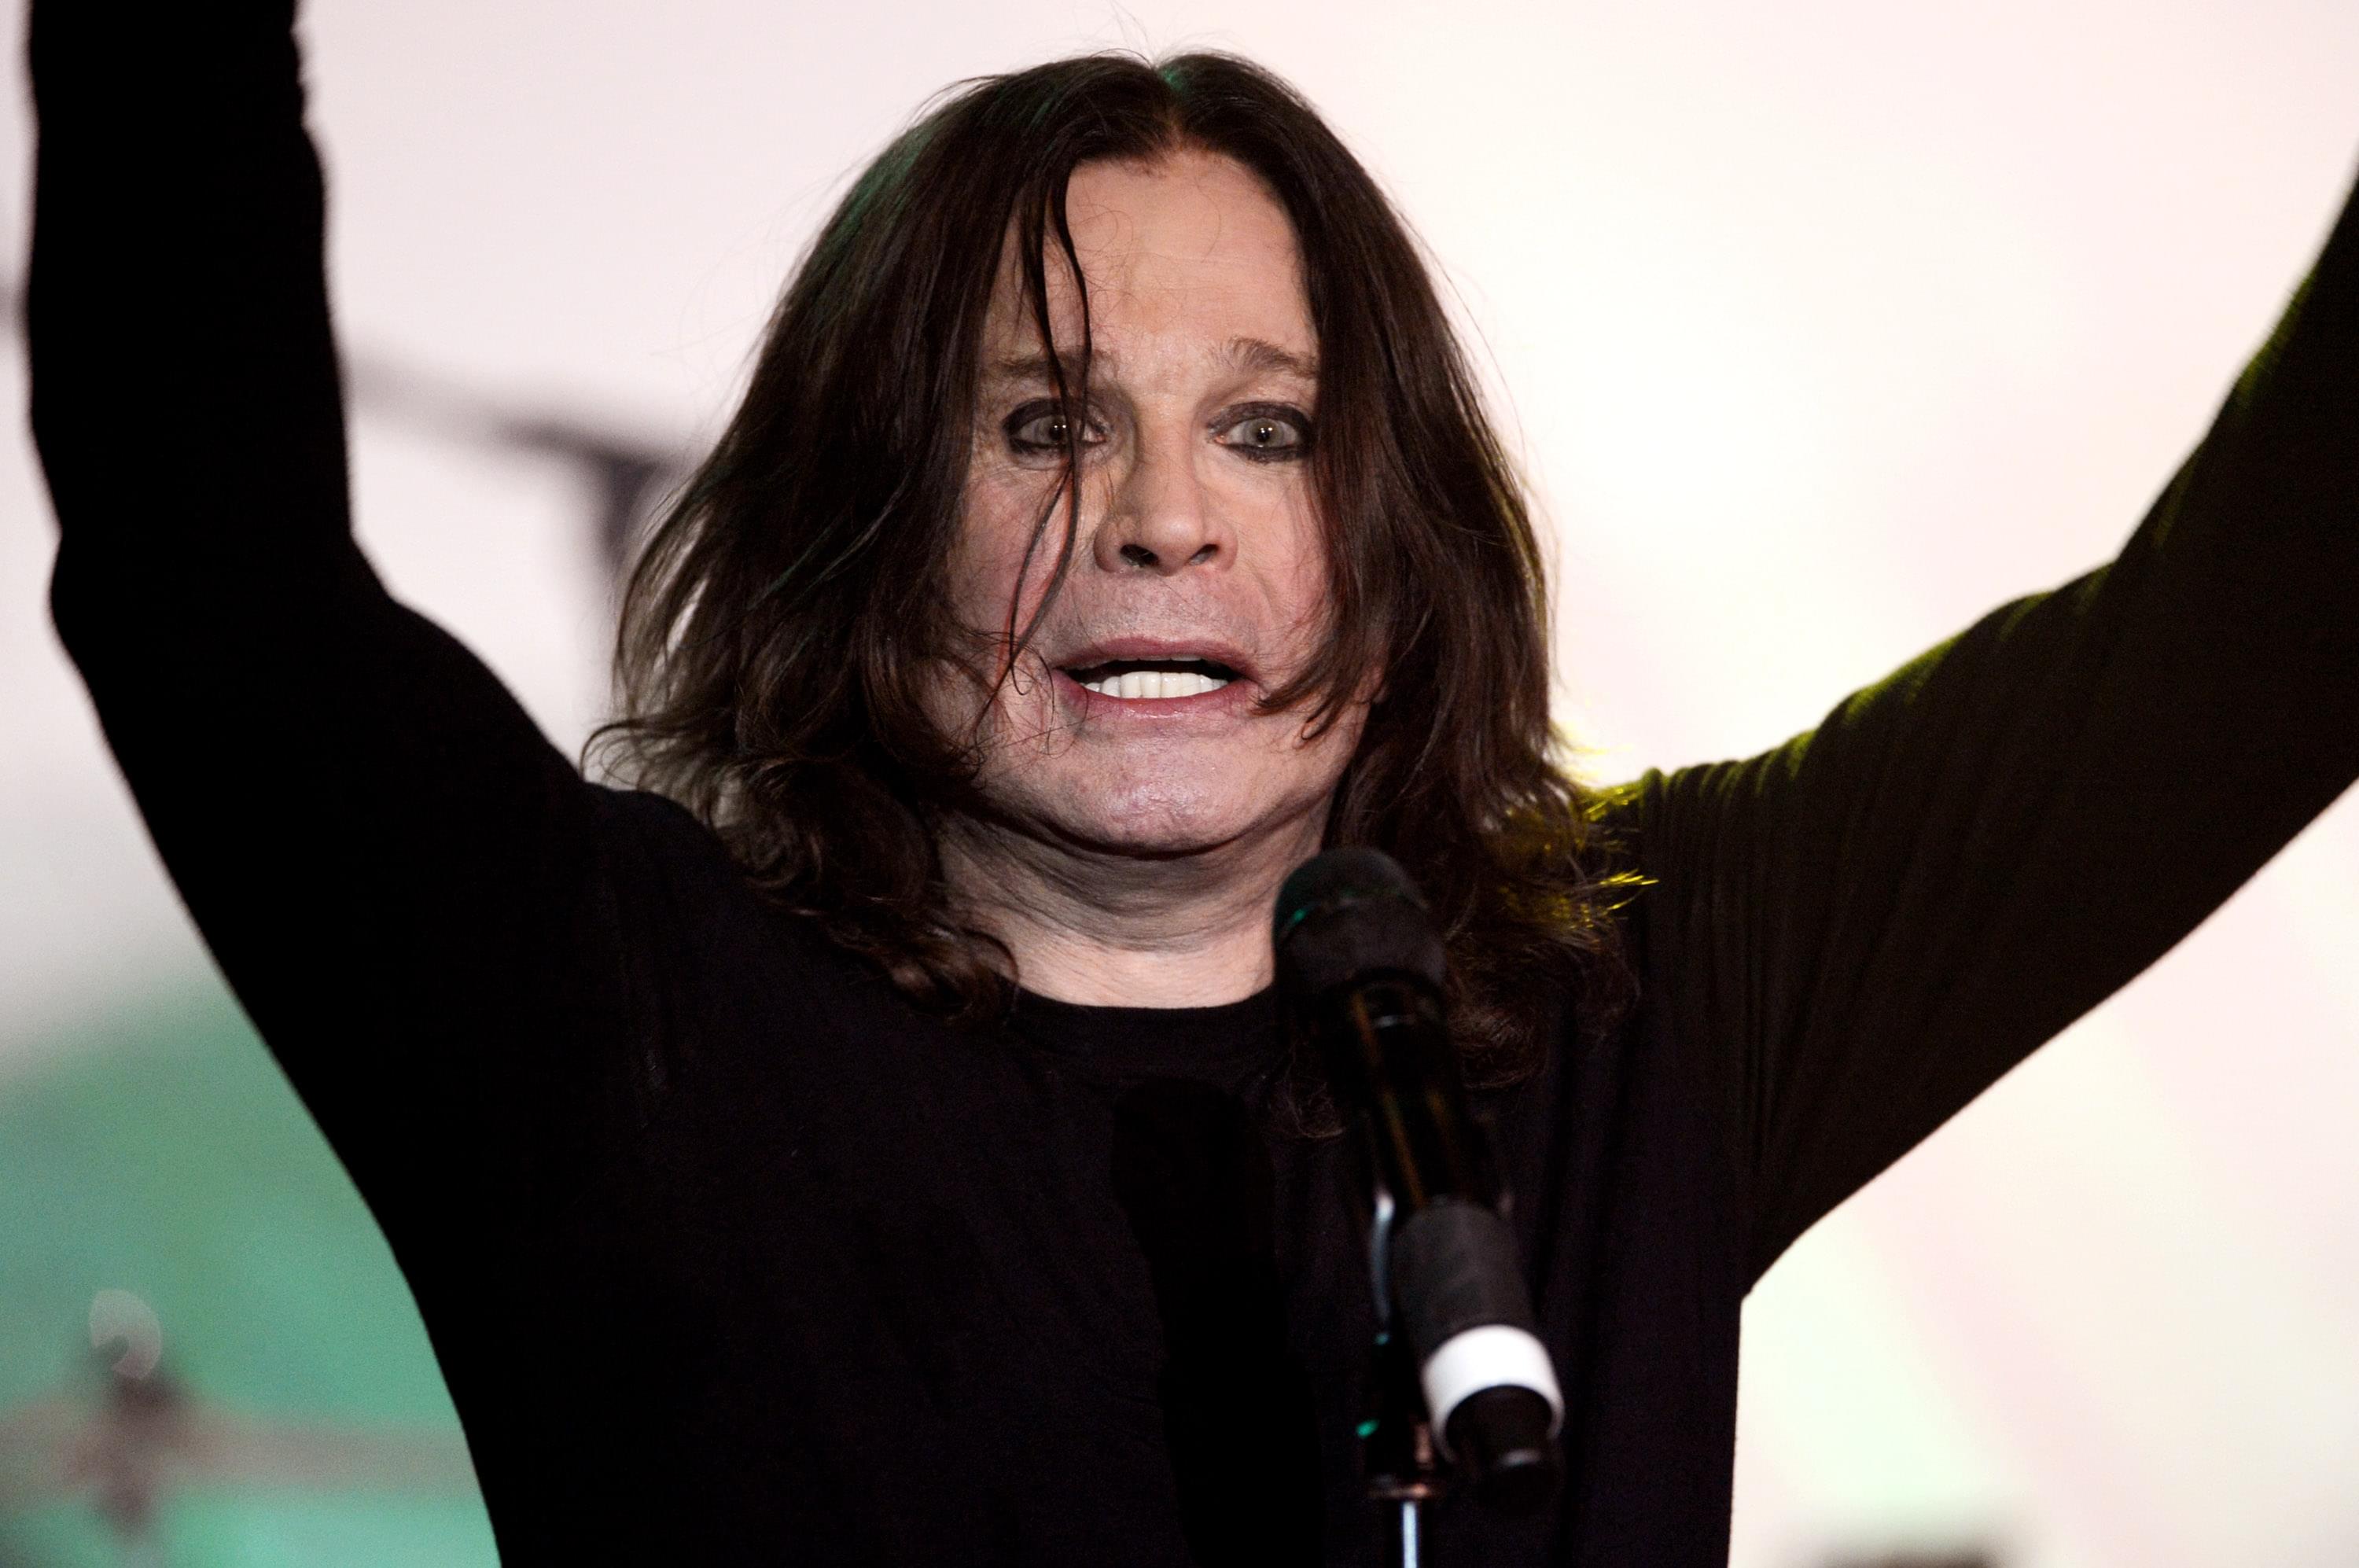 Ozzy Osbourne Releases New Song ‘Nothing To Lose’ Featuring Zakk Wylde [VIDEO]